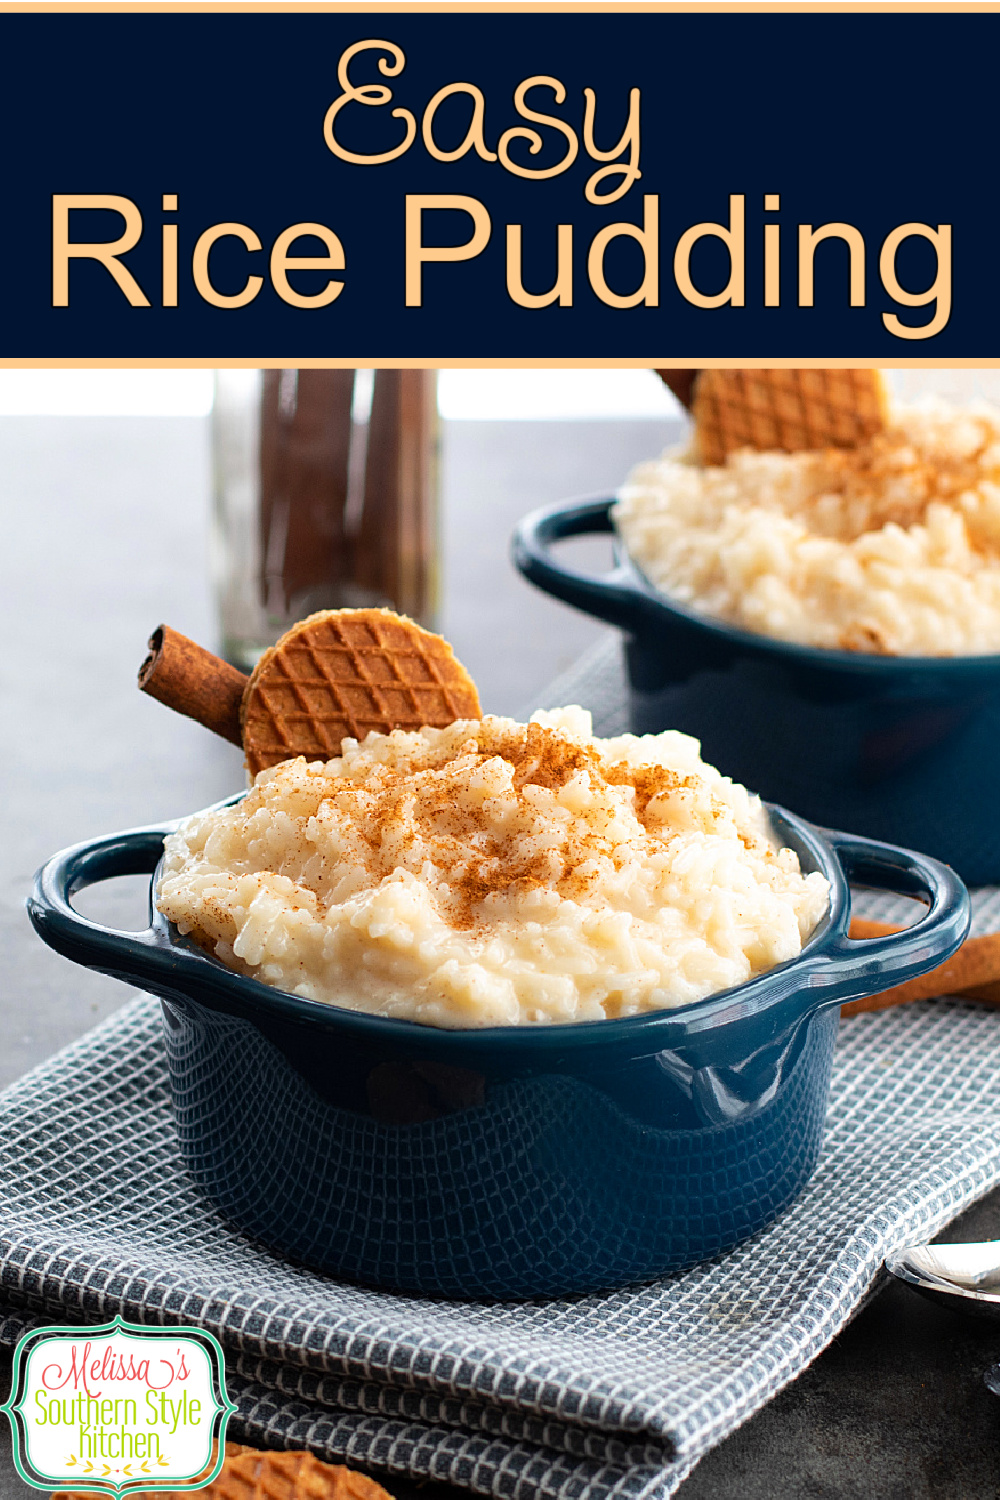 Make this Easy Rice Pudding with a surprise ingredient in no time flat! #ricepudding #easyricepudding #bestricepuddingrecipes #vanillaicecream #desserts #southernstylericepudding